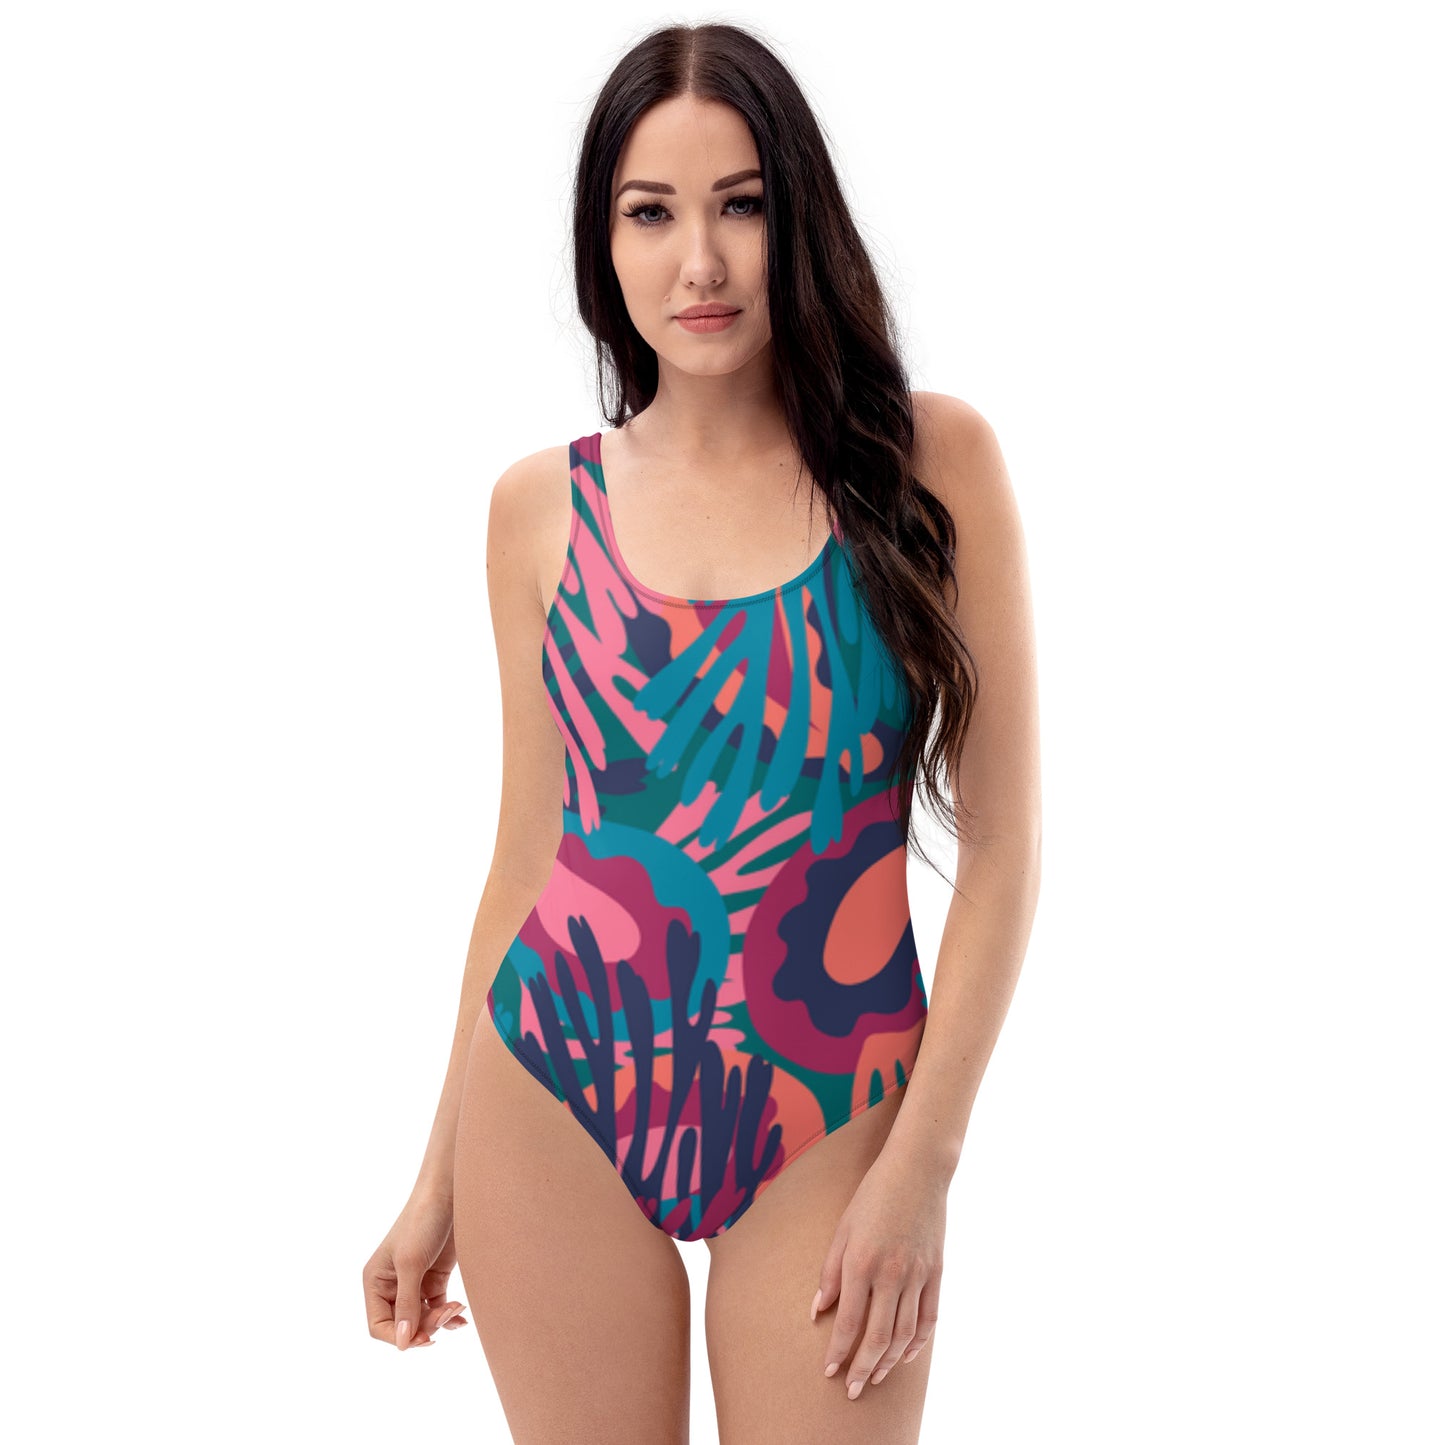 Colourful Coral One-Piece Swimsuit - Essentric Swimwear